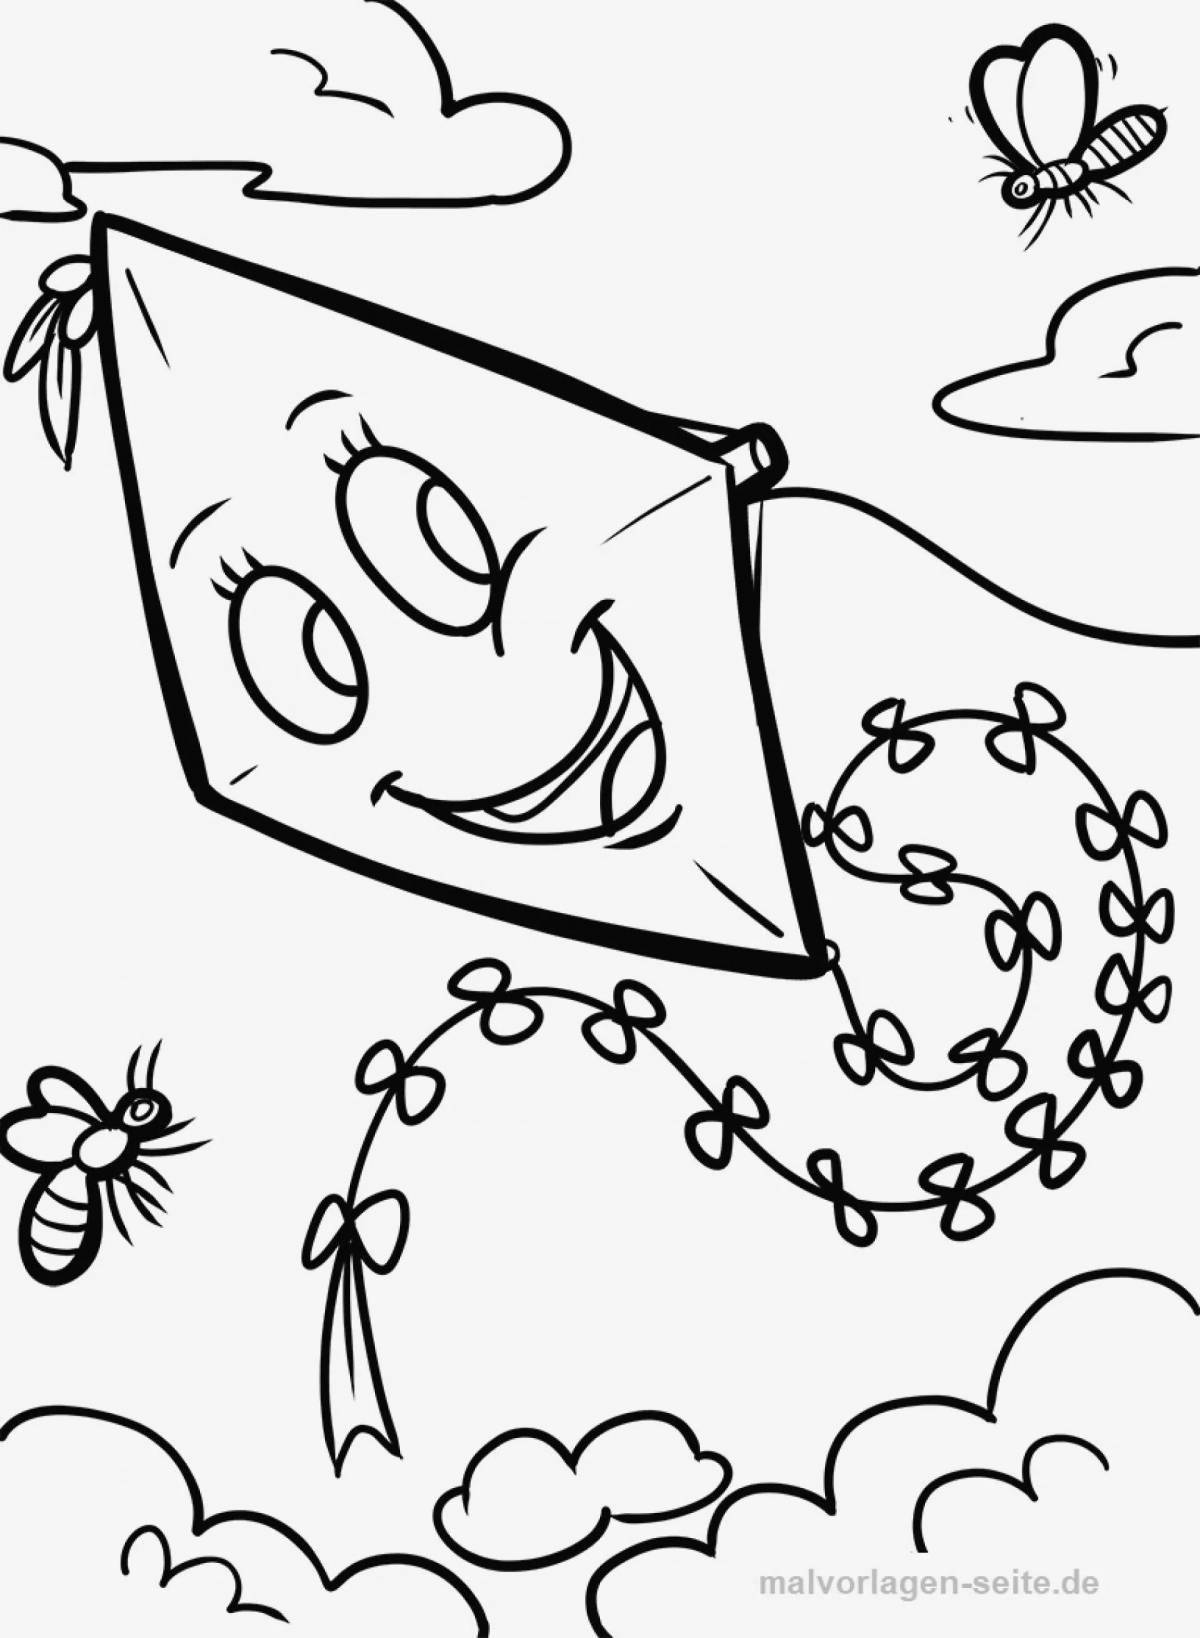 Playful kite coloring page for kids